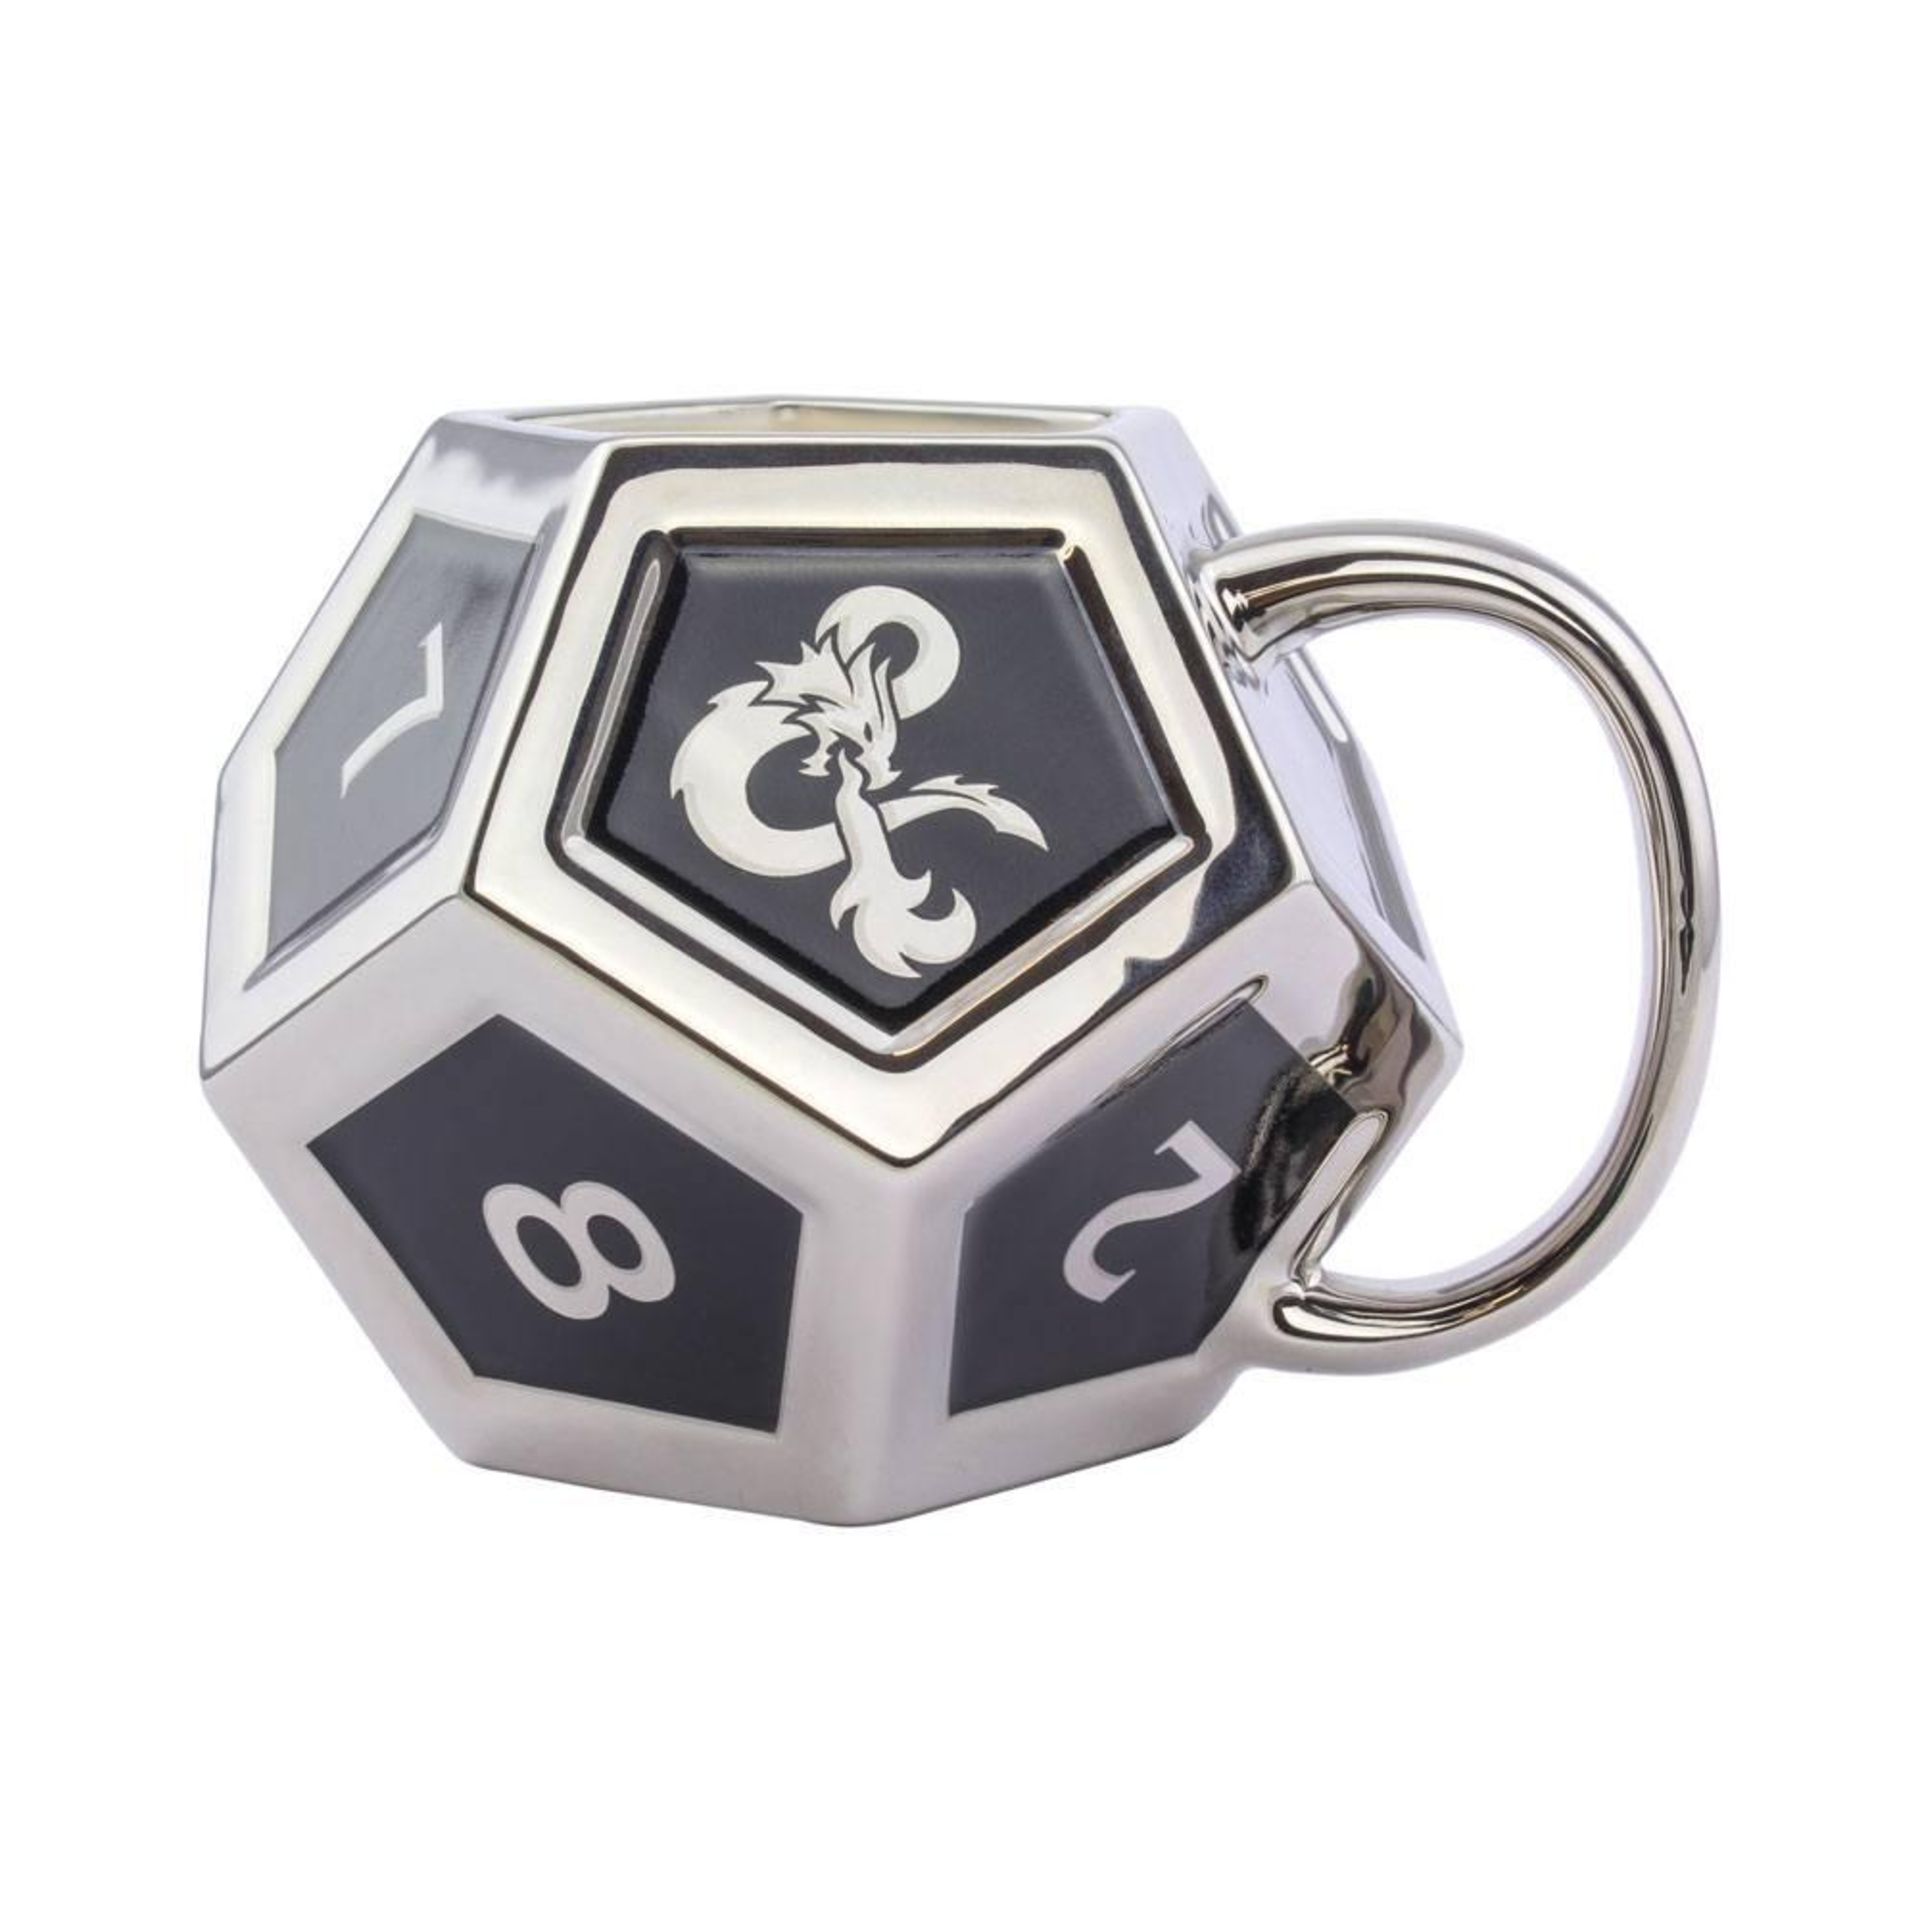 Paladone PP6640DD Dungeons and Dragons D12 Dice Shaped Mug Â£12.99Condition ReportAppraisal